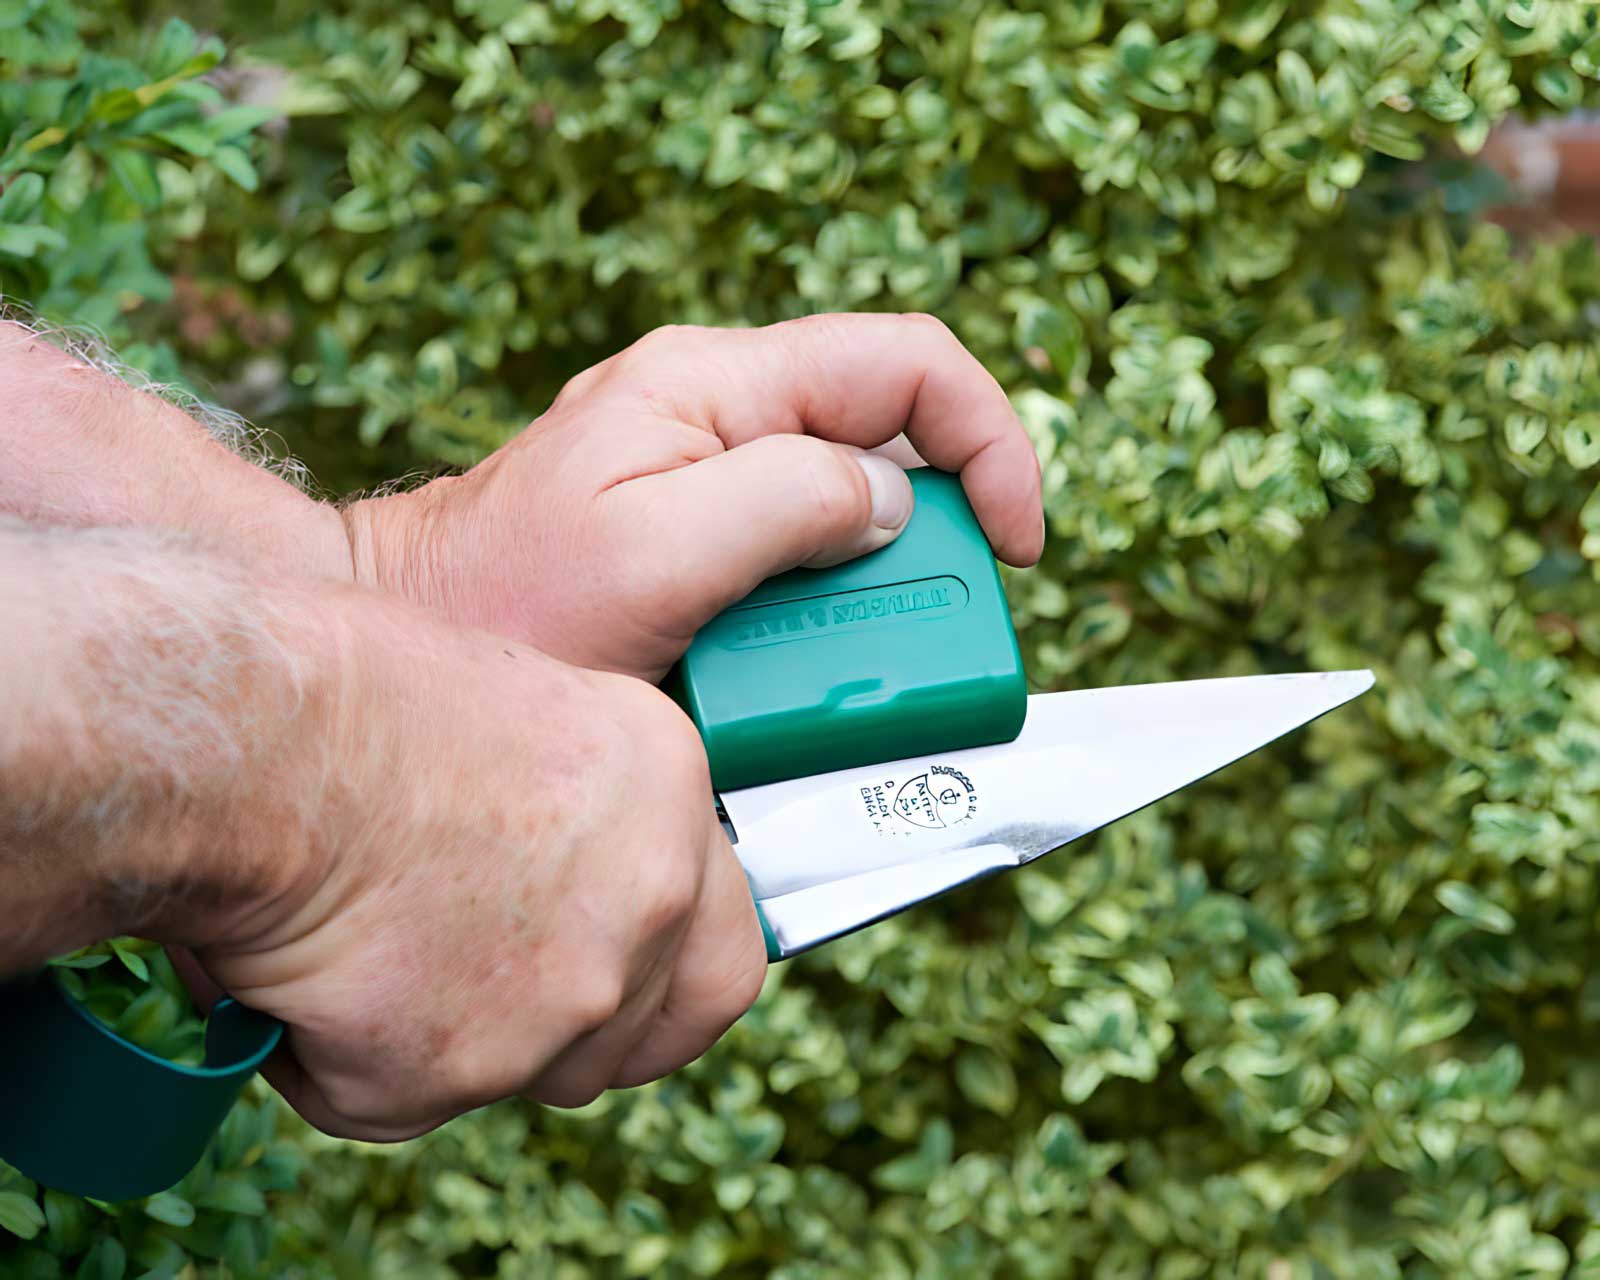 The Topiary Trimming Shear Sharpener is easy to use.